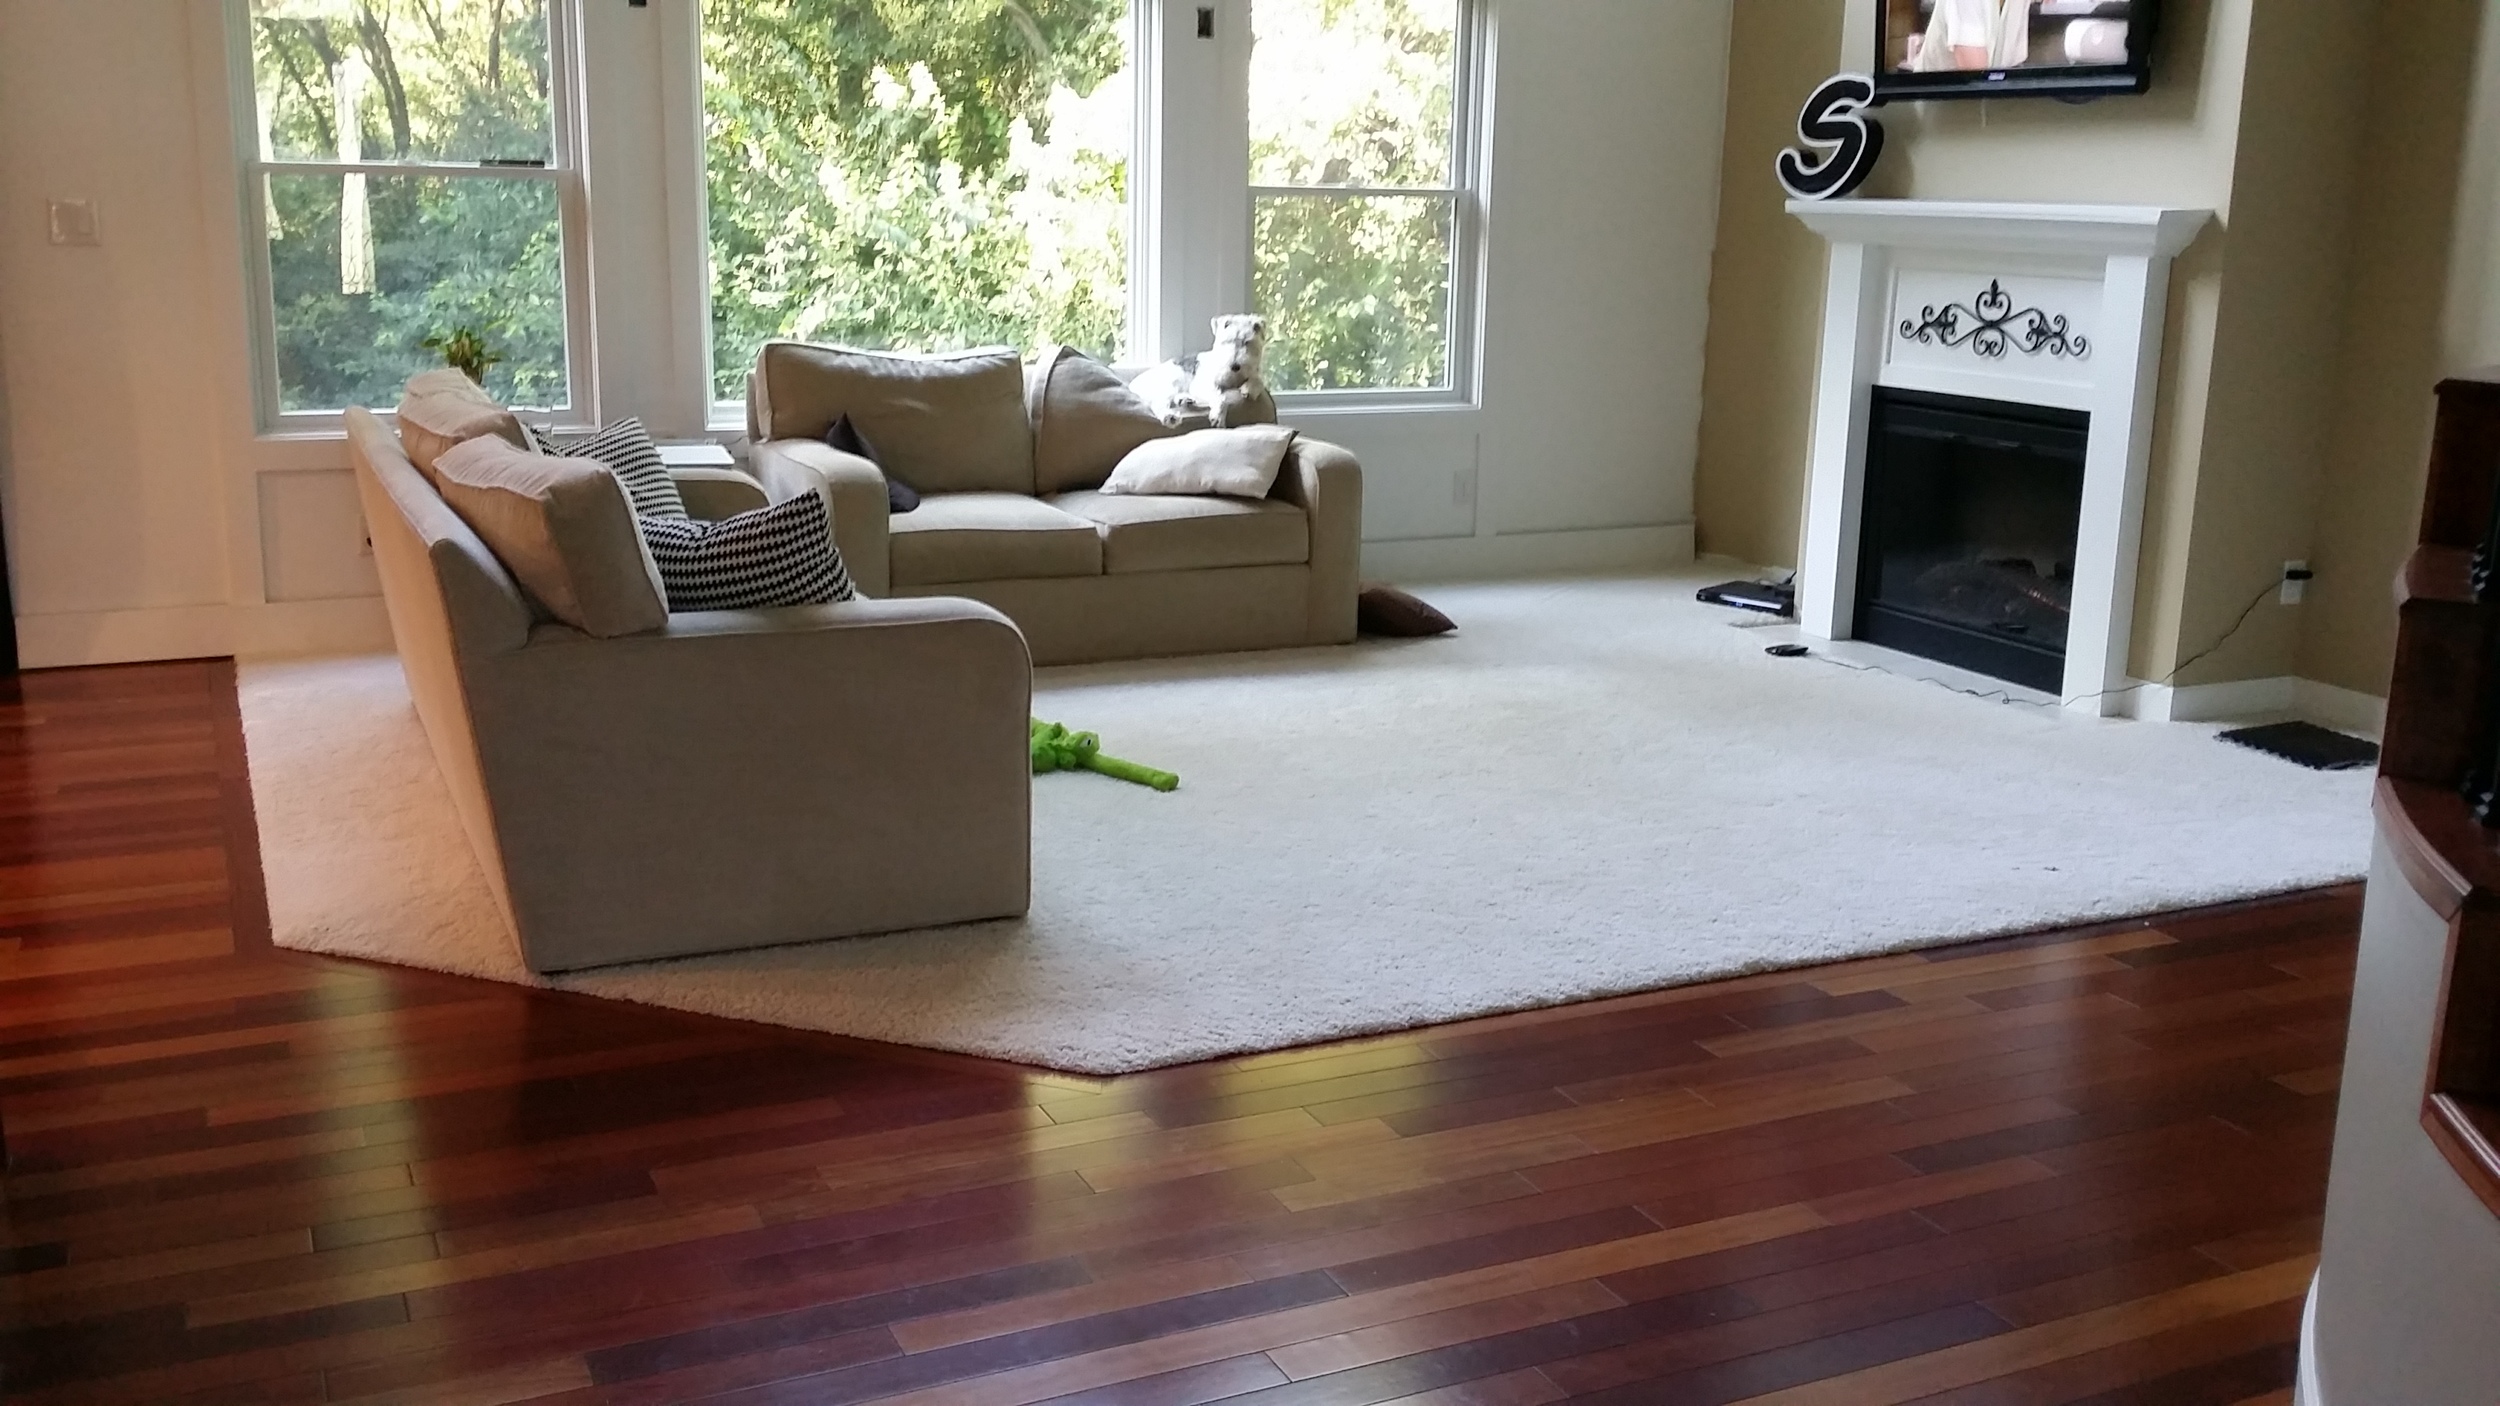 What You Need to Know About Replacing Carpet With Hardwood